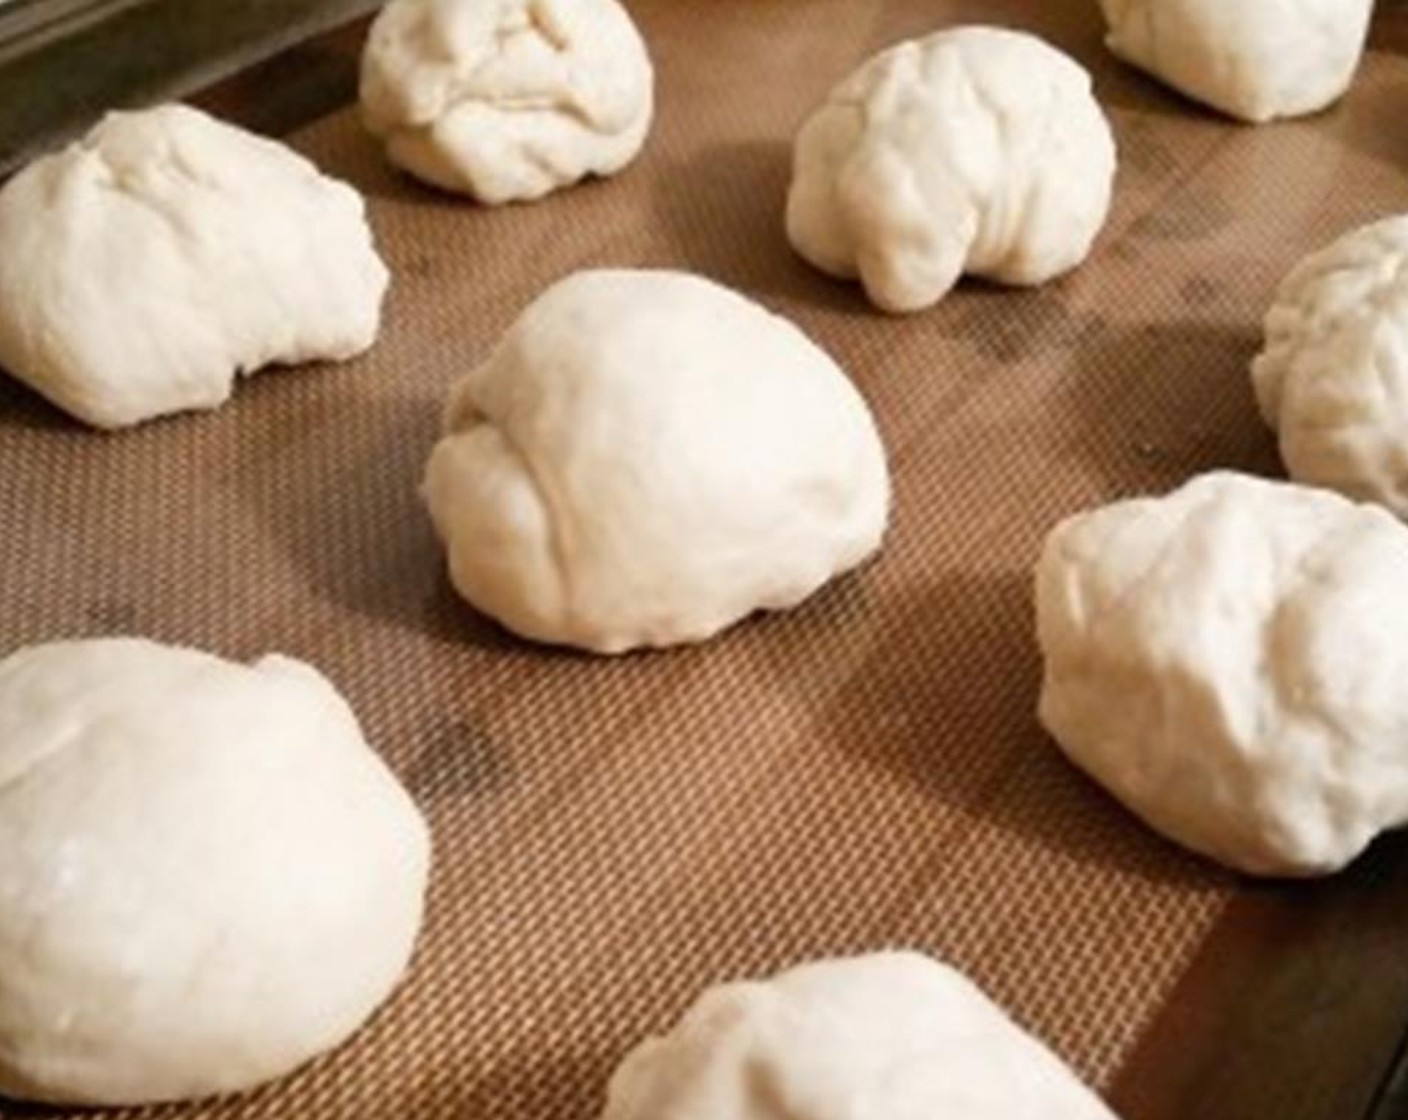 step 5 Form dough into rolls and place on baking sheet. Allow dough to rise for 20 minutes.